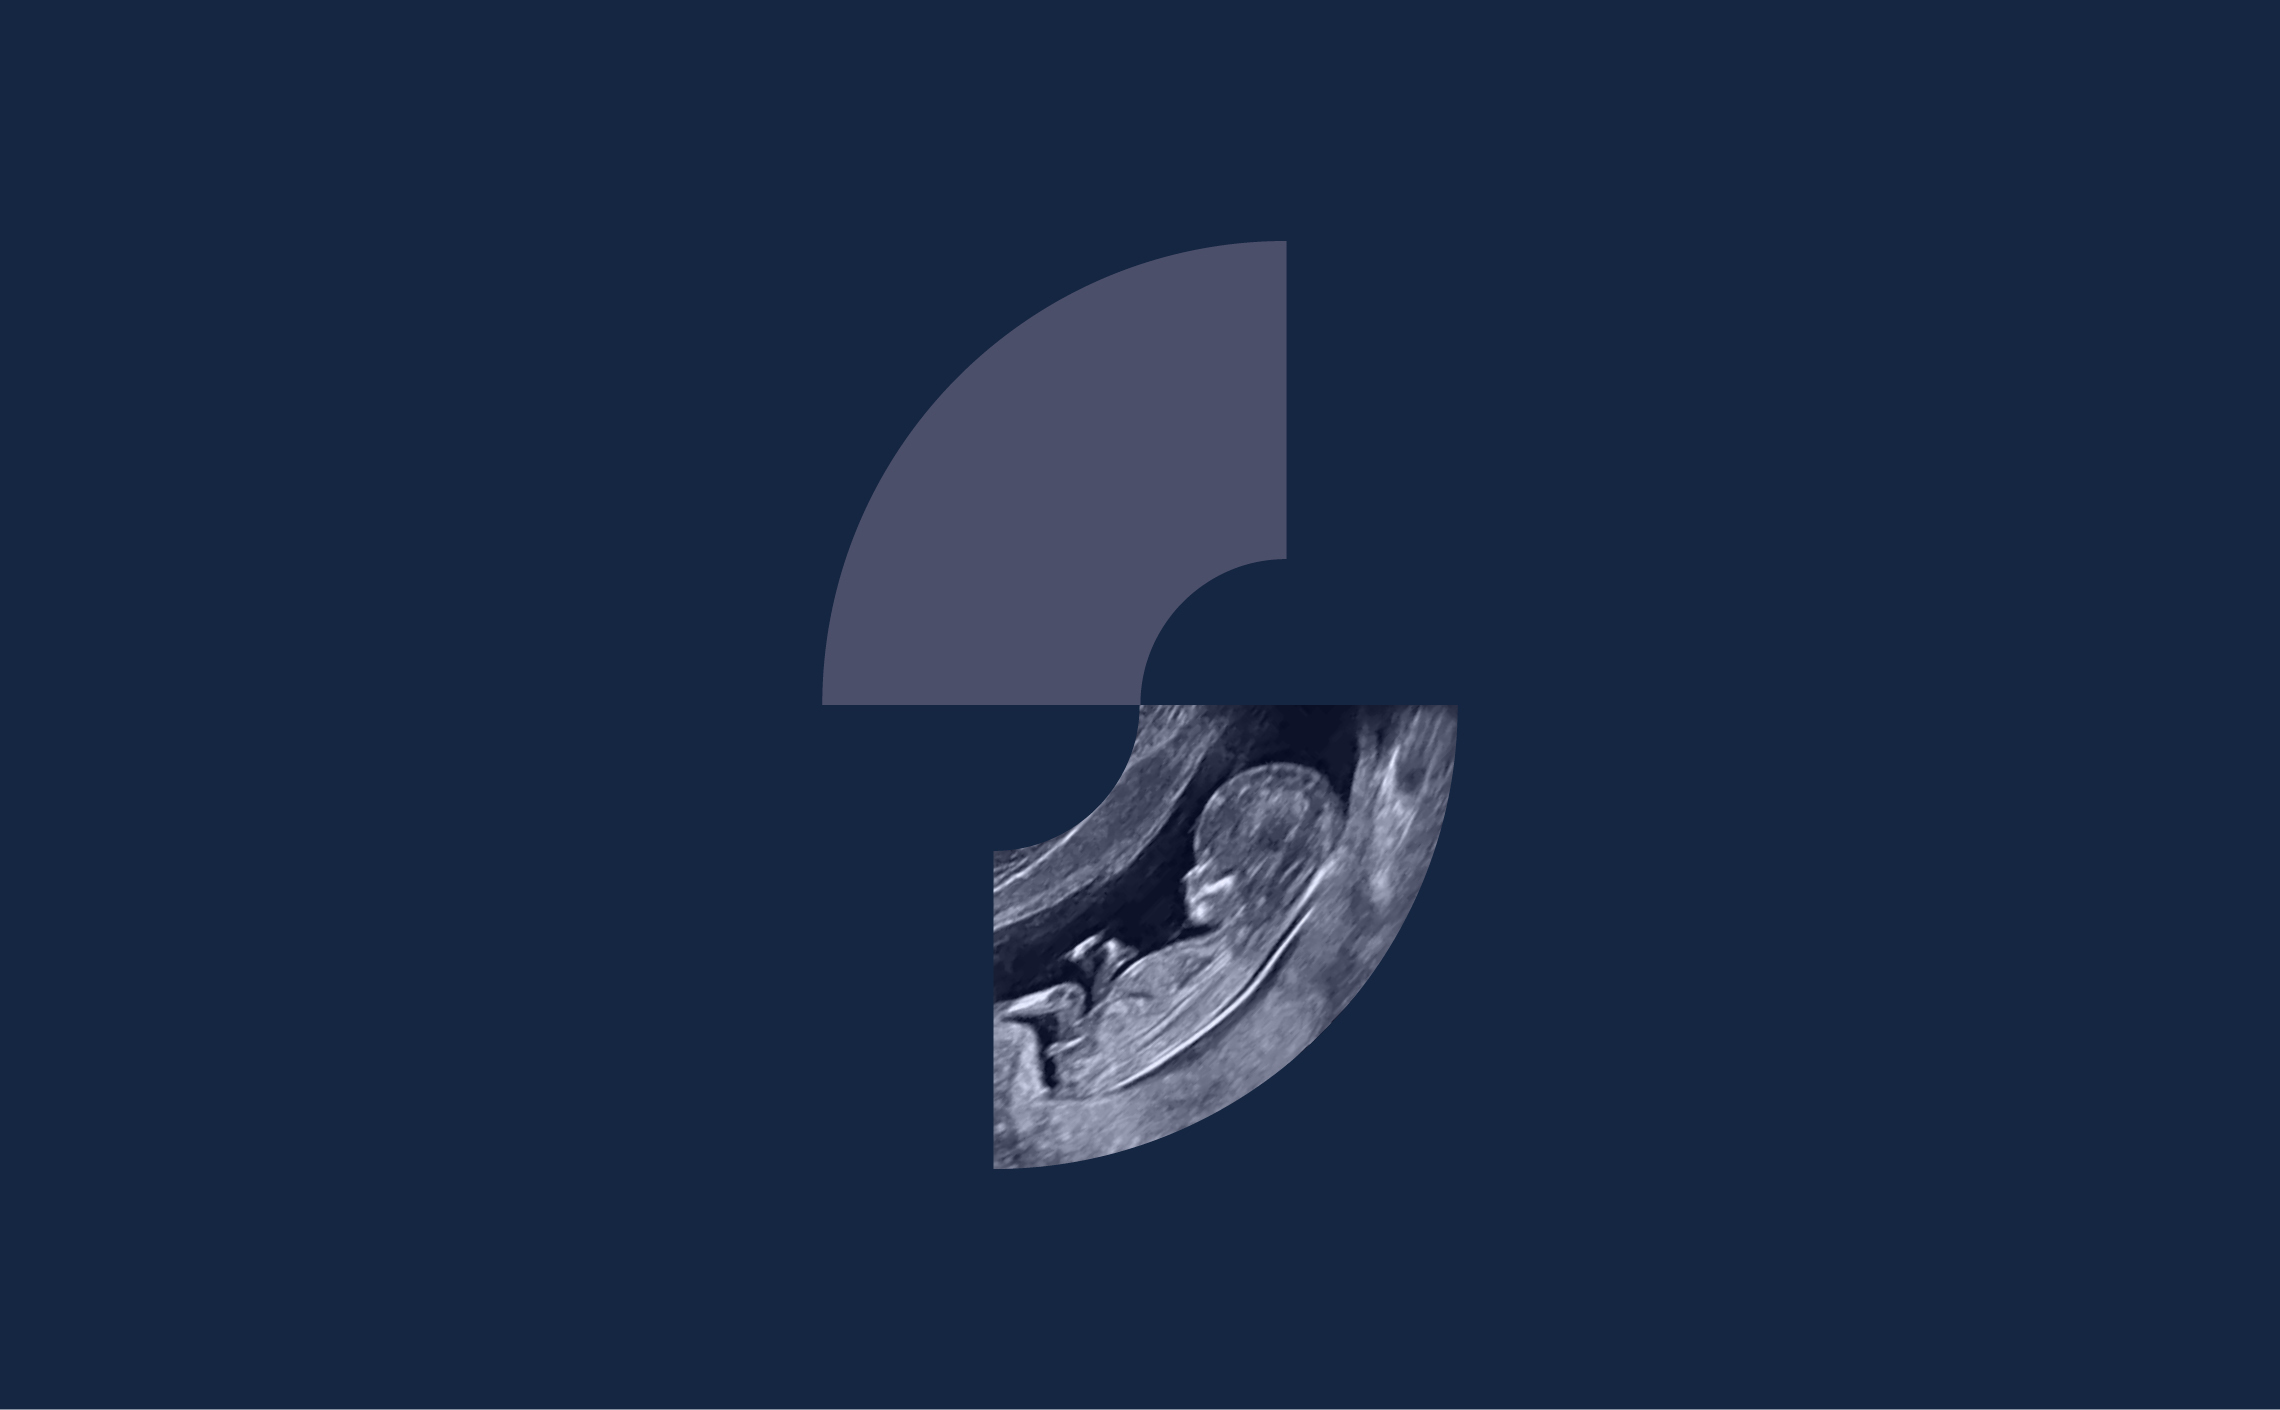 echography medical S letter logo